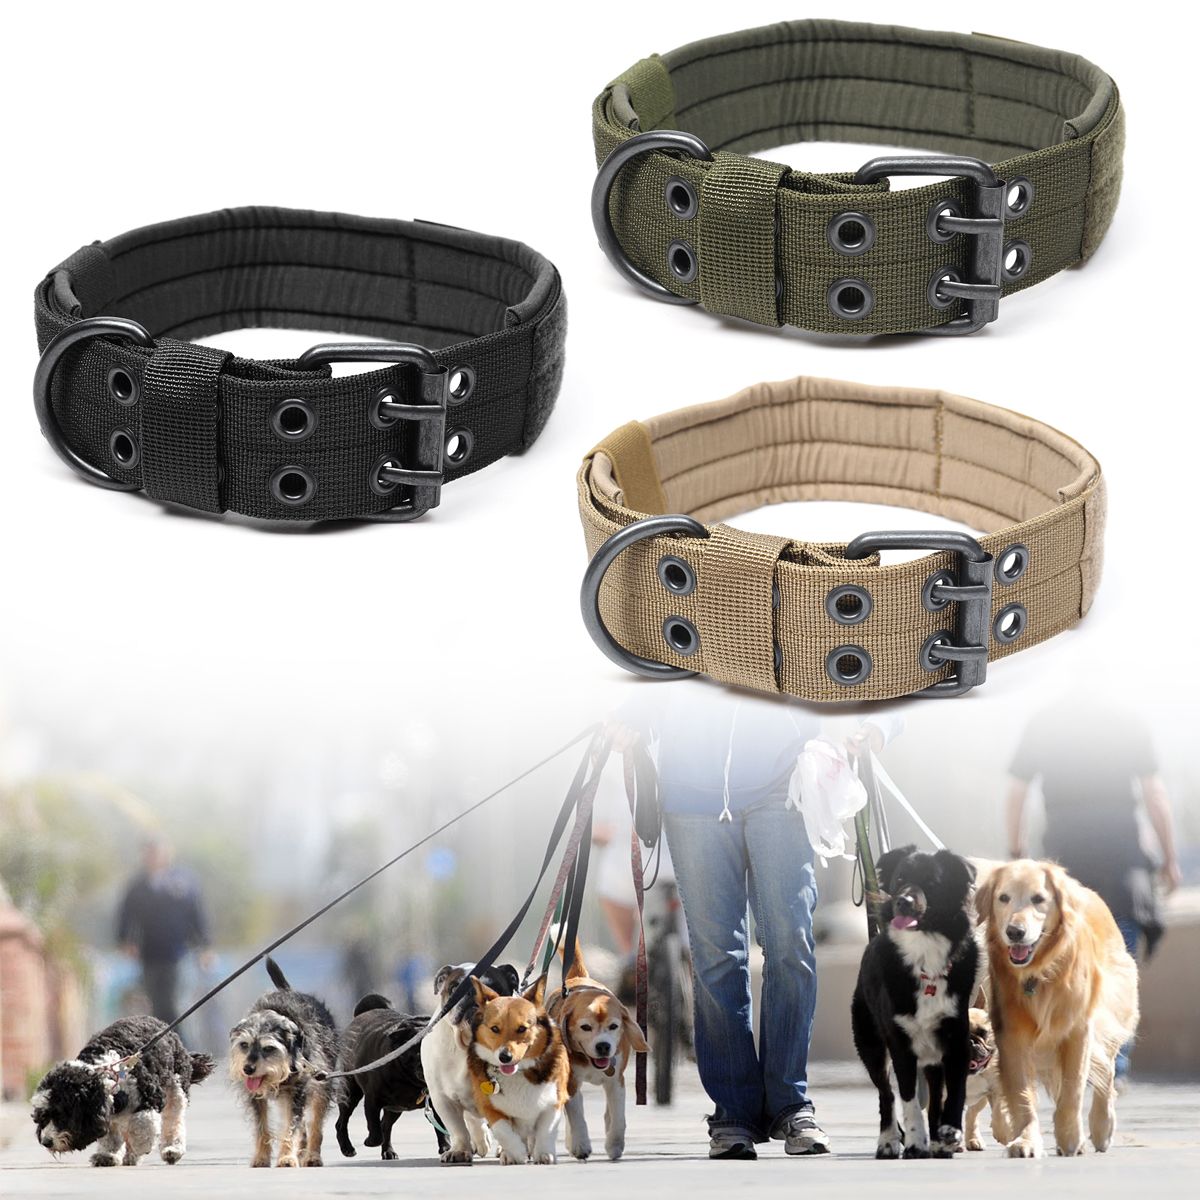 Nylon-Tactical-Dog-Collar-Military-Adjustable-Training-Dog-Collar-with-Metal-D-Ring-Buckle-L-Size-1310253